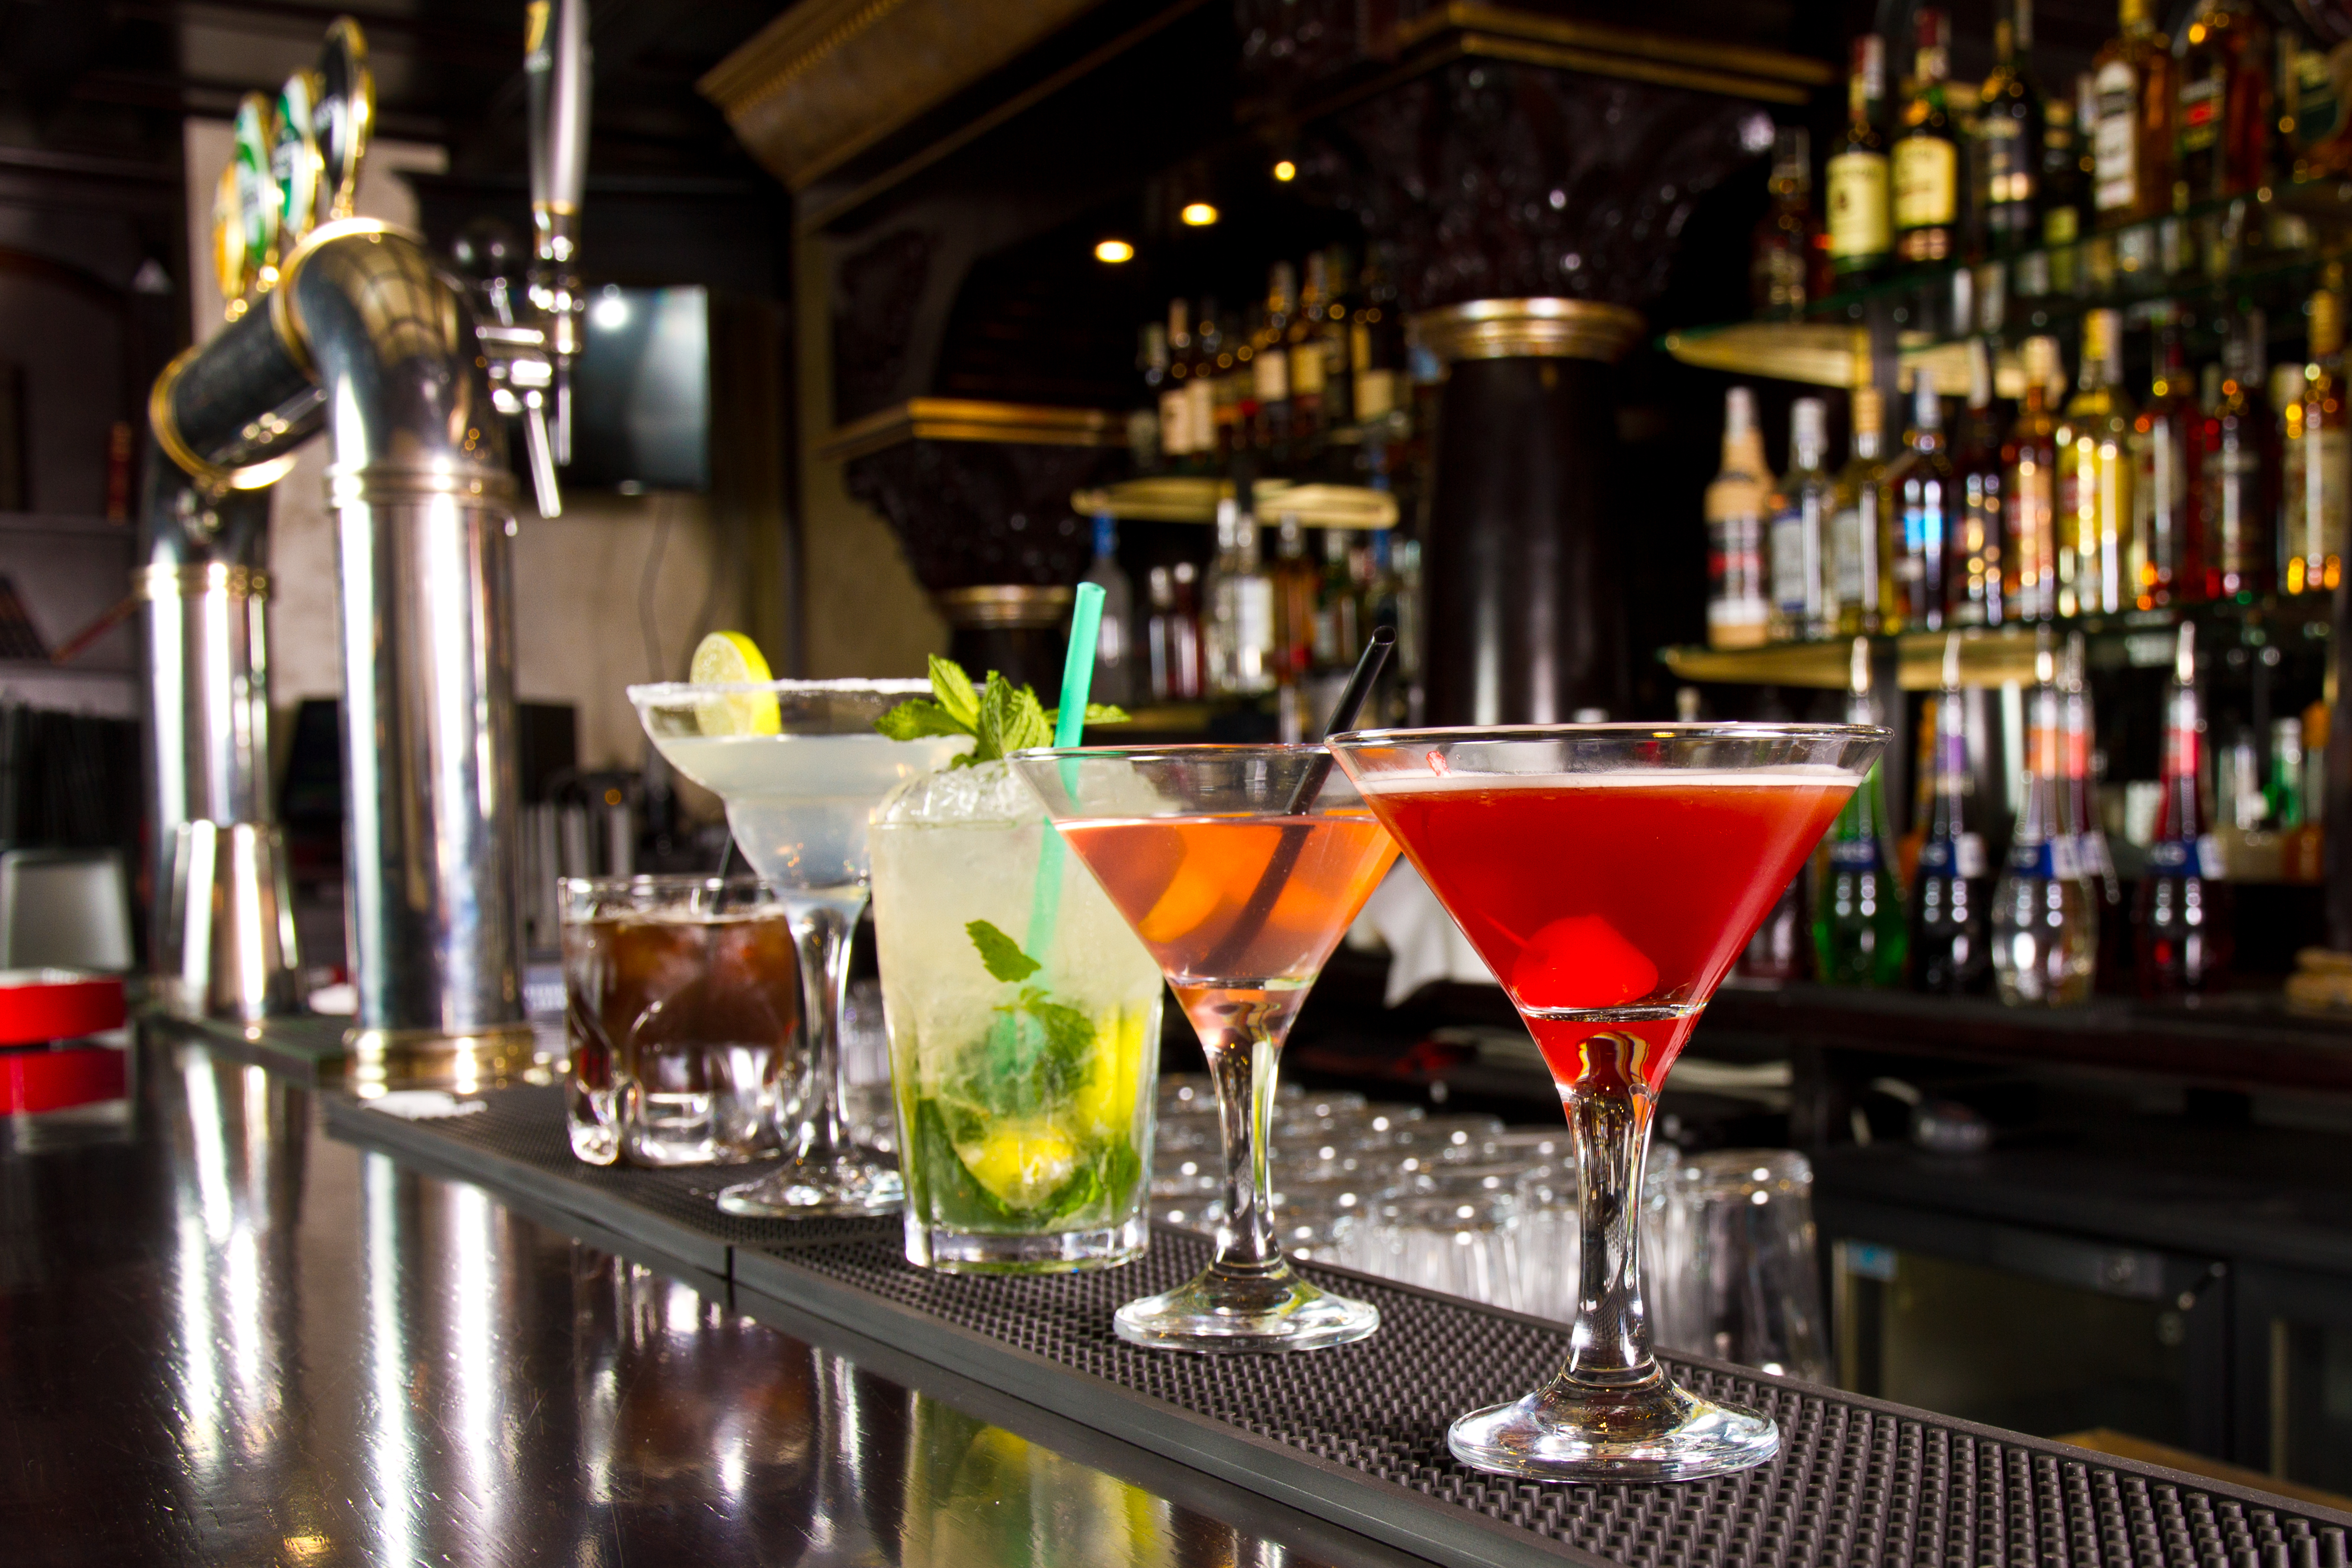 Five cocktails on the bar counter. | Source: Shutterstock